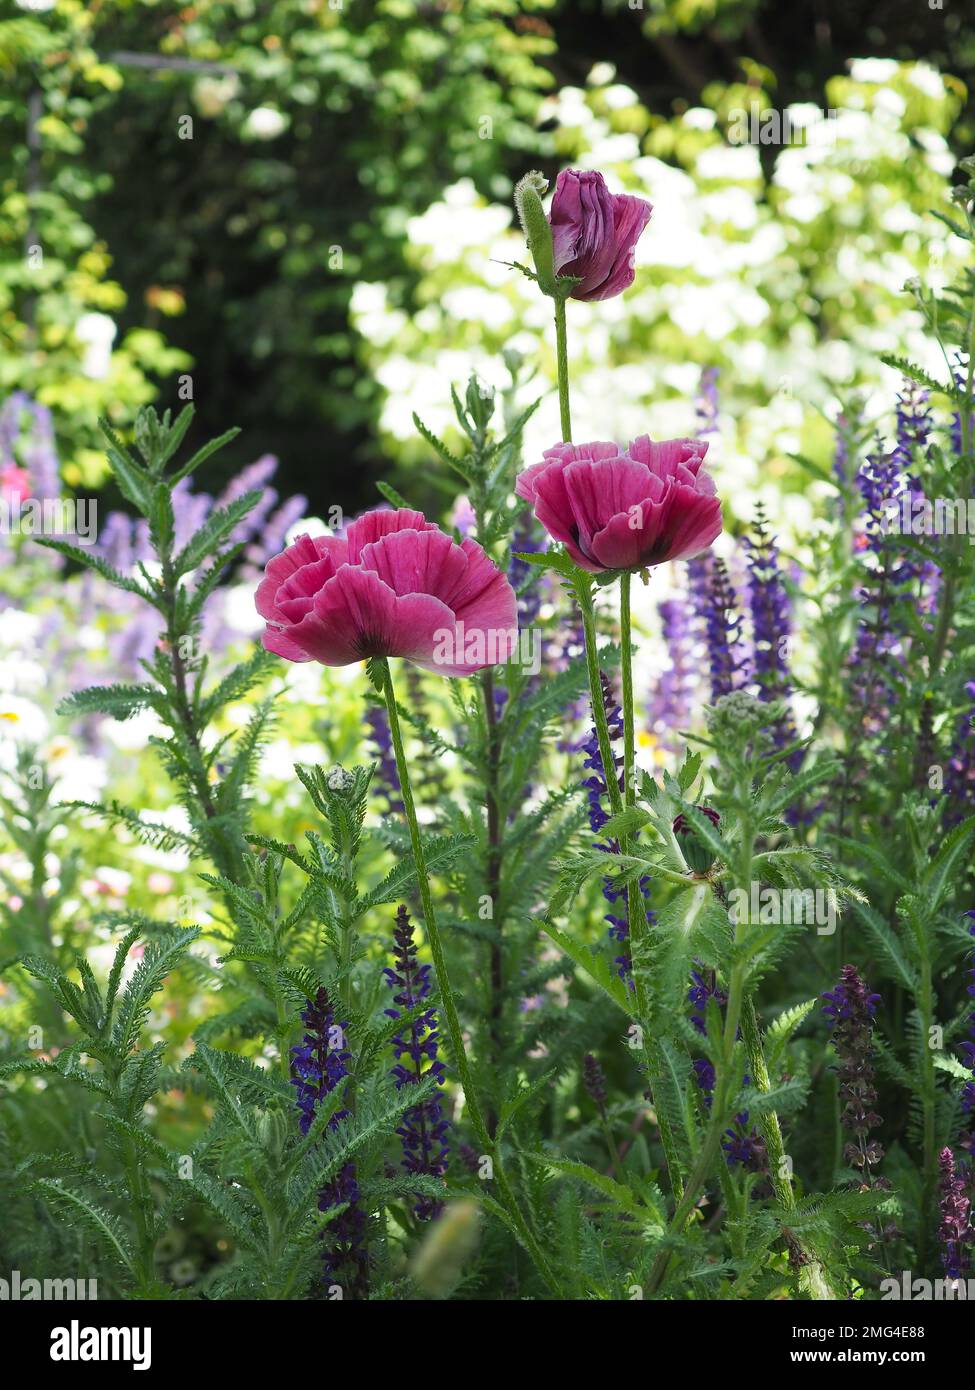 Eye level shot of three Papaver orientale 'Patty's Plum' poppies in an English garden border on a sunny summer's day Stock Photo